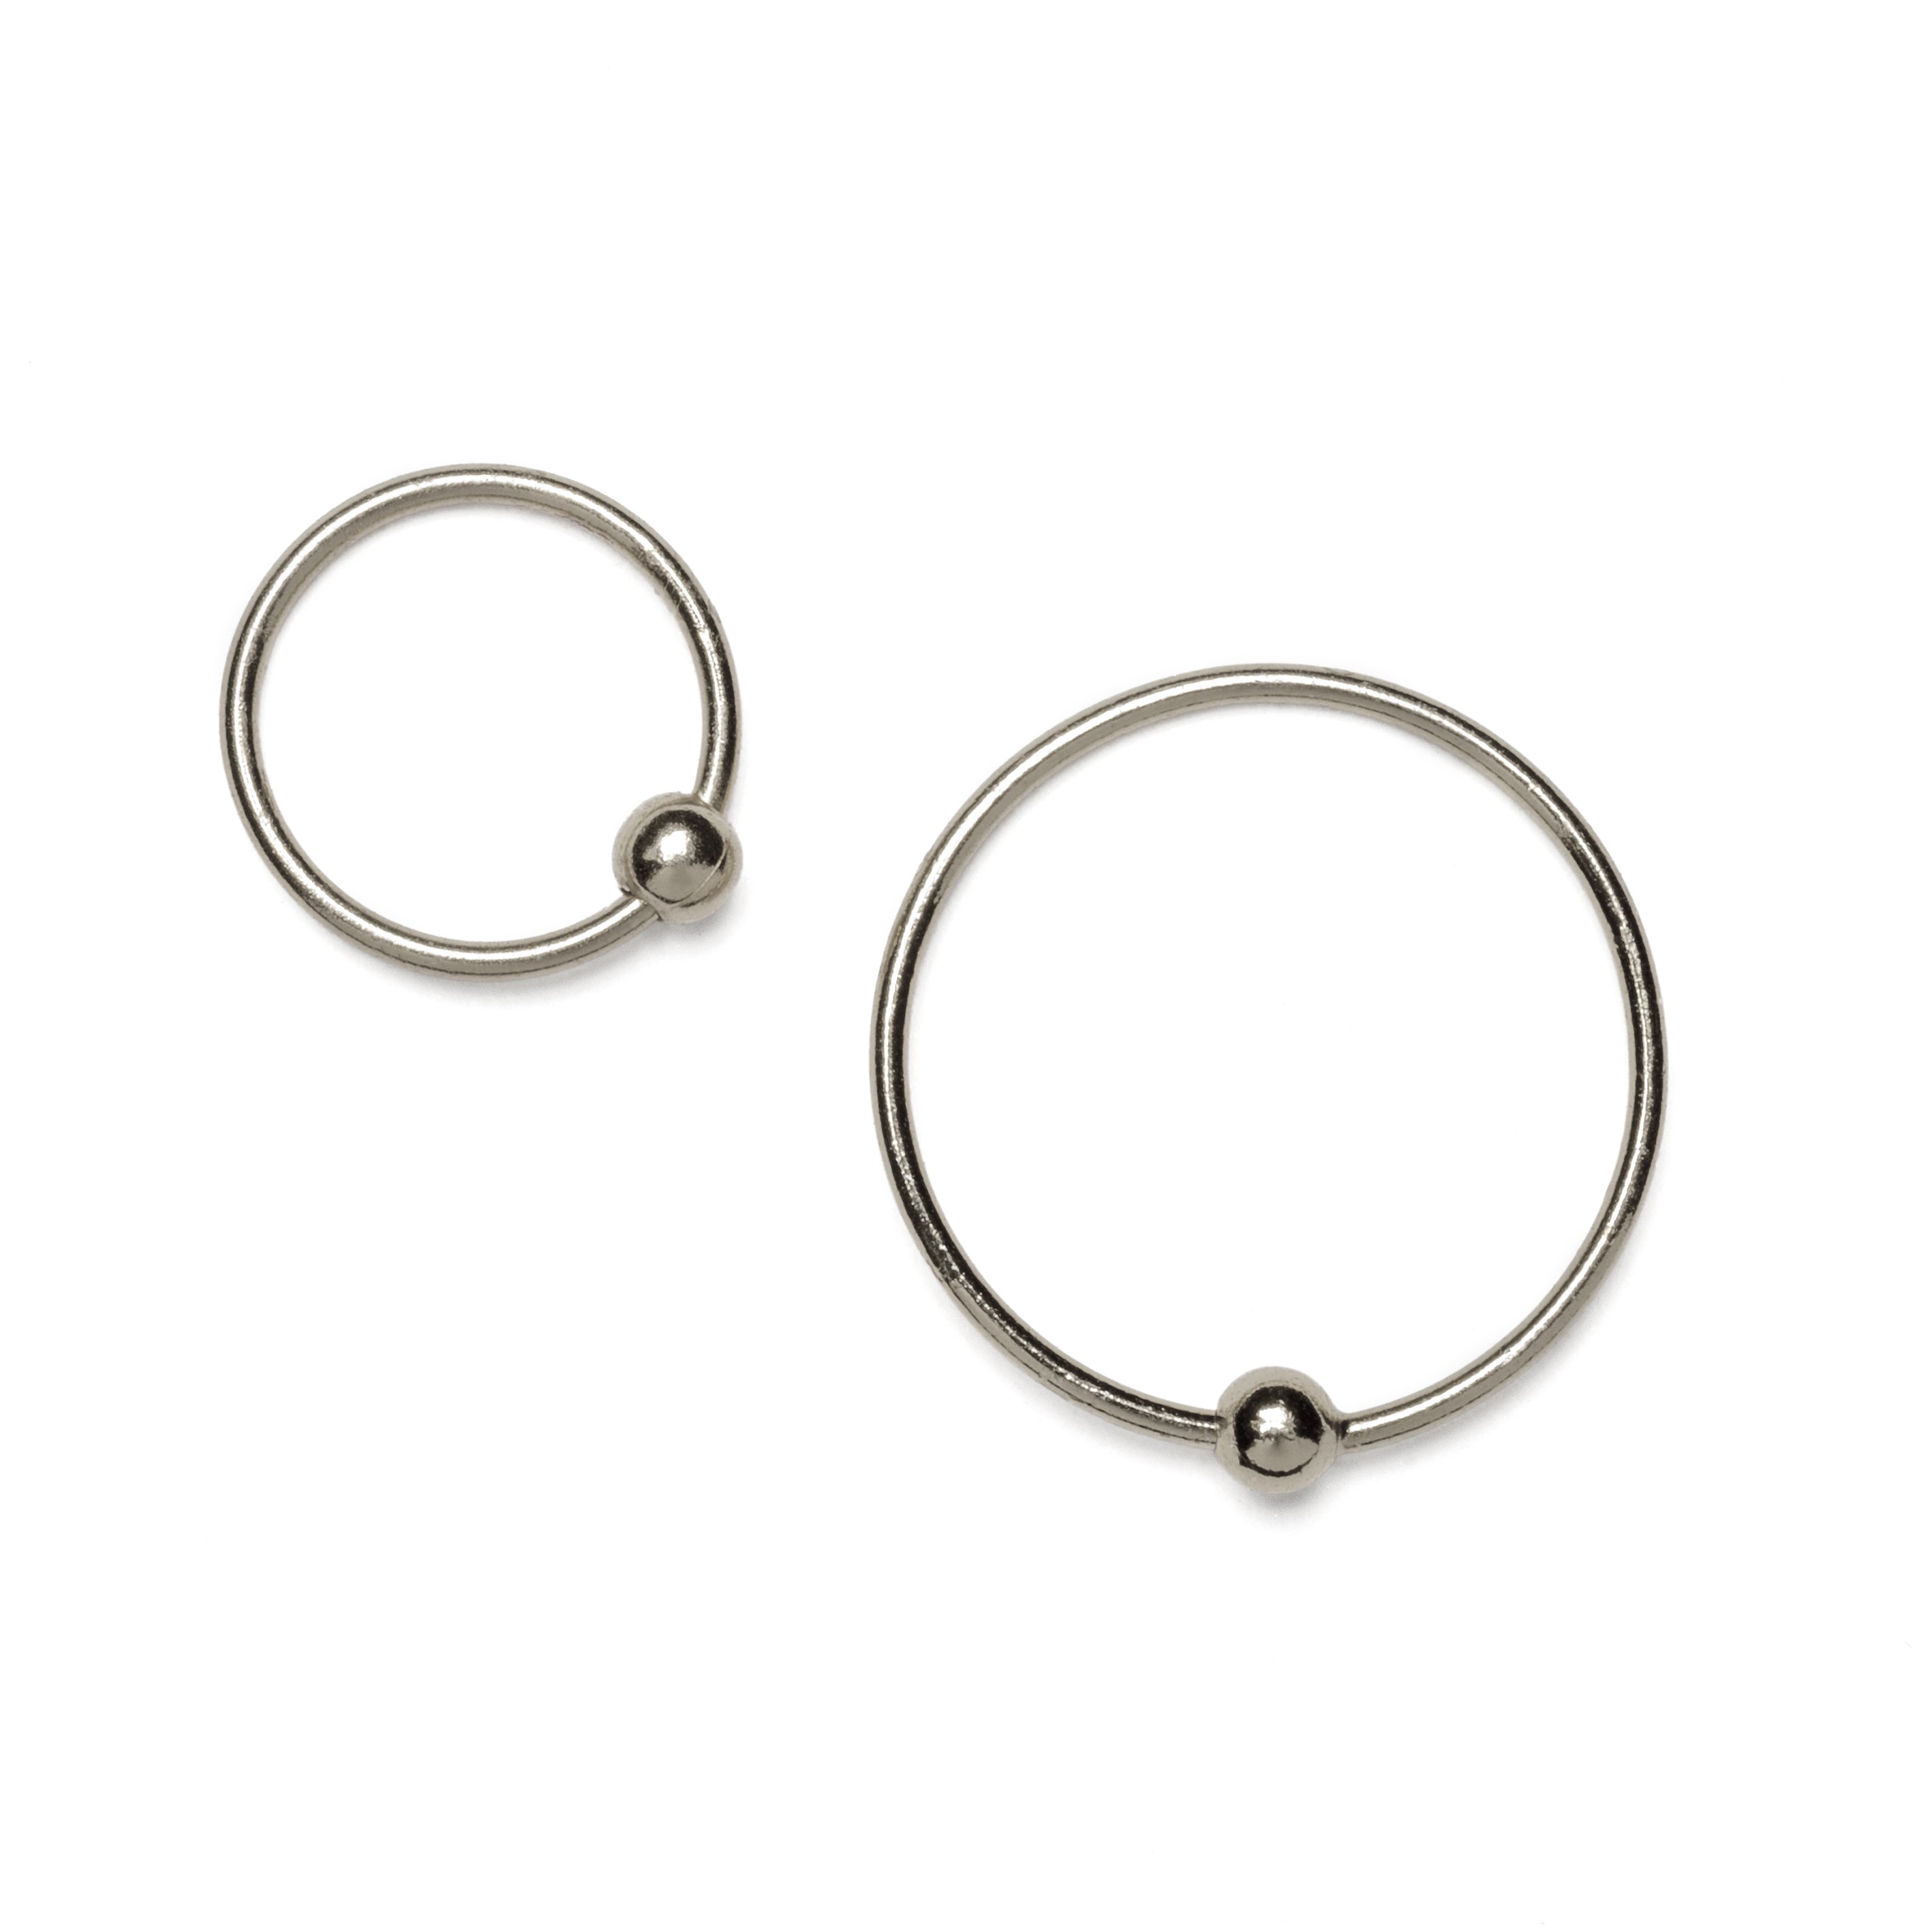 8mm and 10 mm Dhevan silver piercing ring with ball closure frontal view